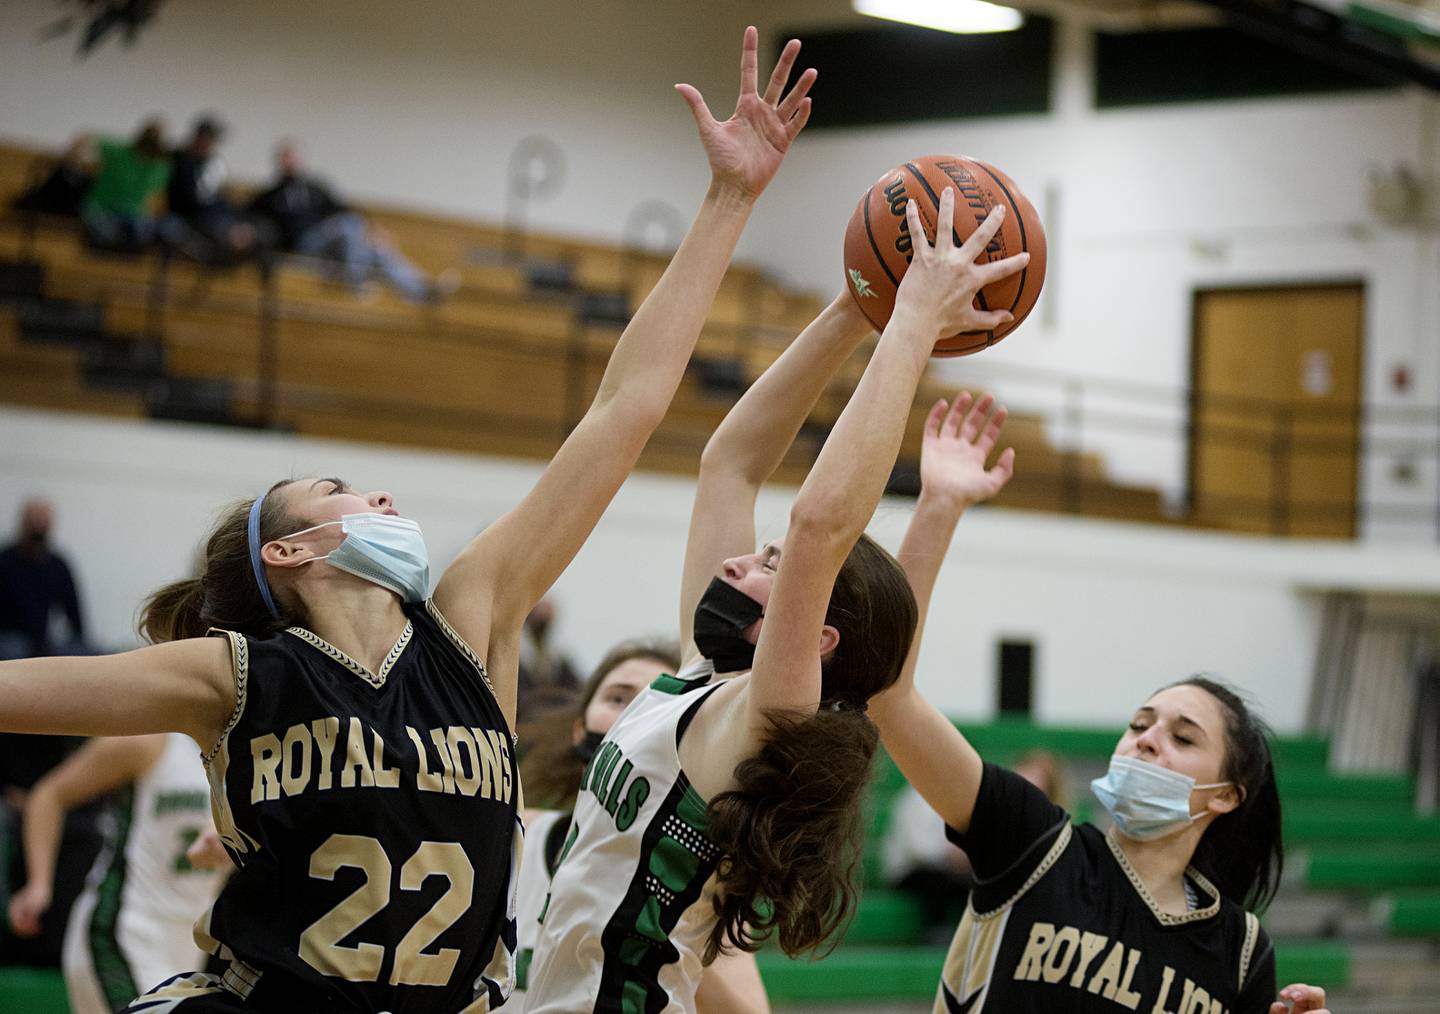 Rock Falls' Brooke Howard looks to put up a shot against Rockford Christian's Avery Demo on Saturday, Jan. 22, 2022.